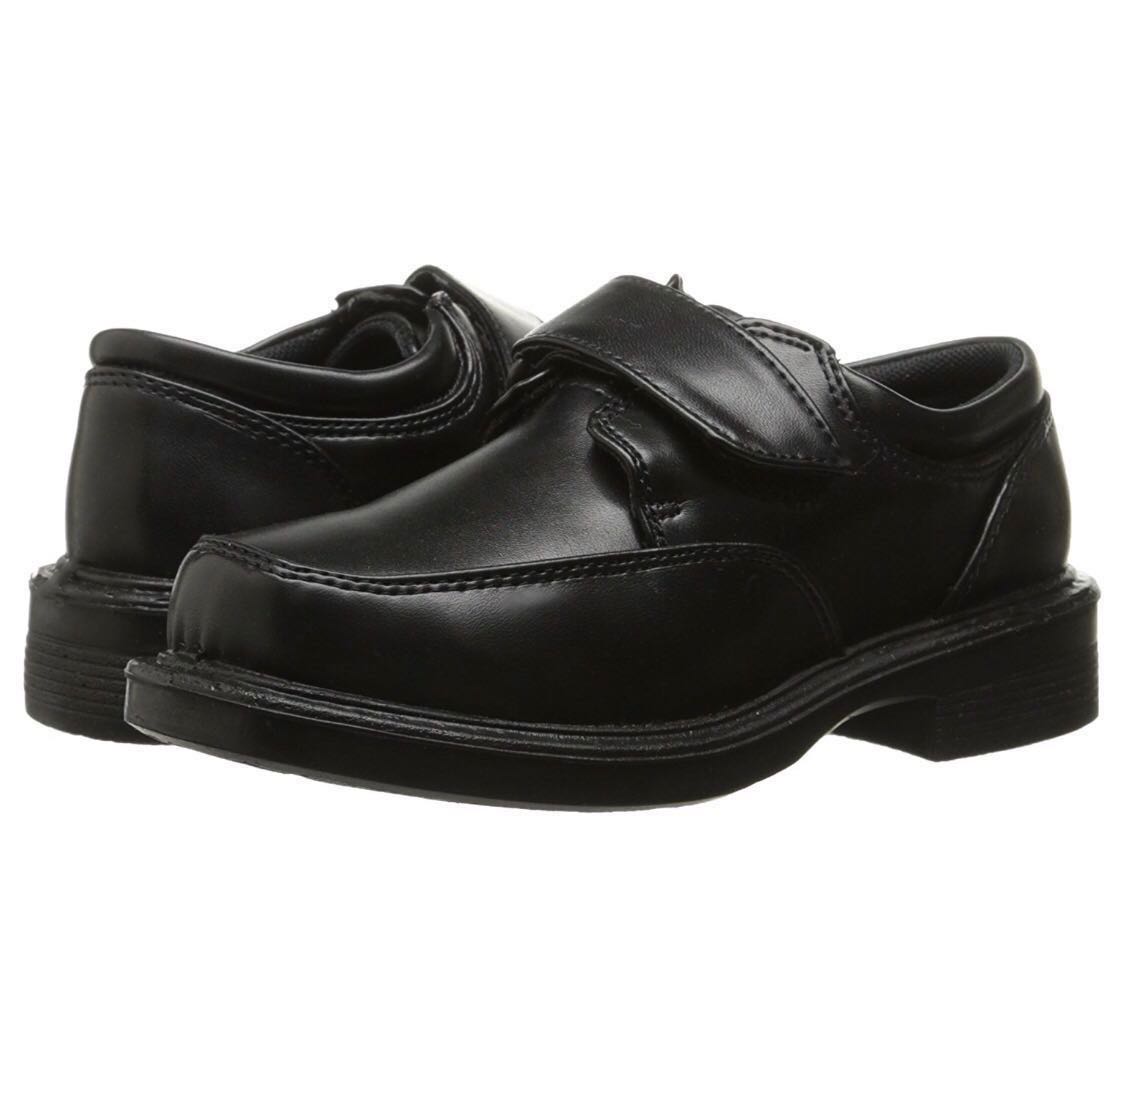 black oxford shoes for boys